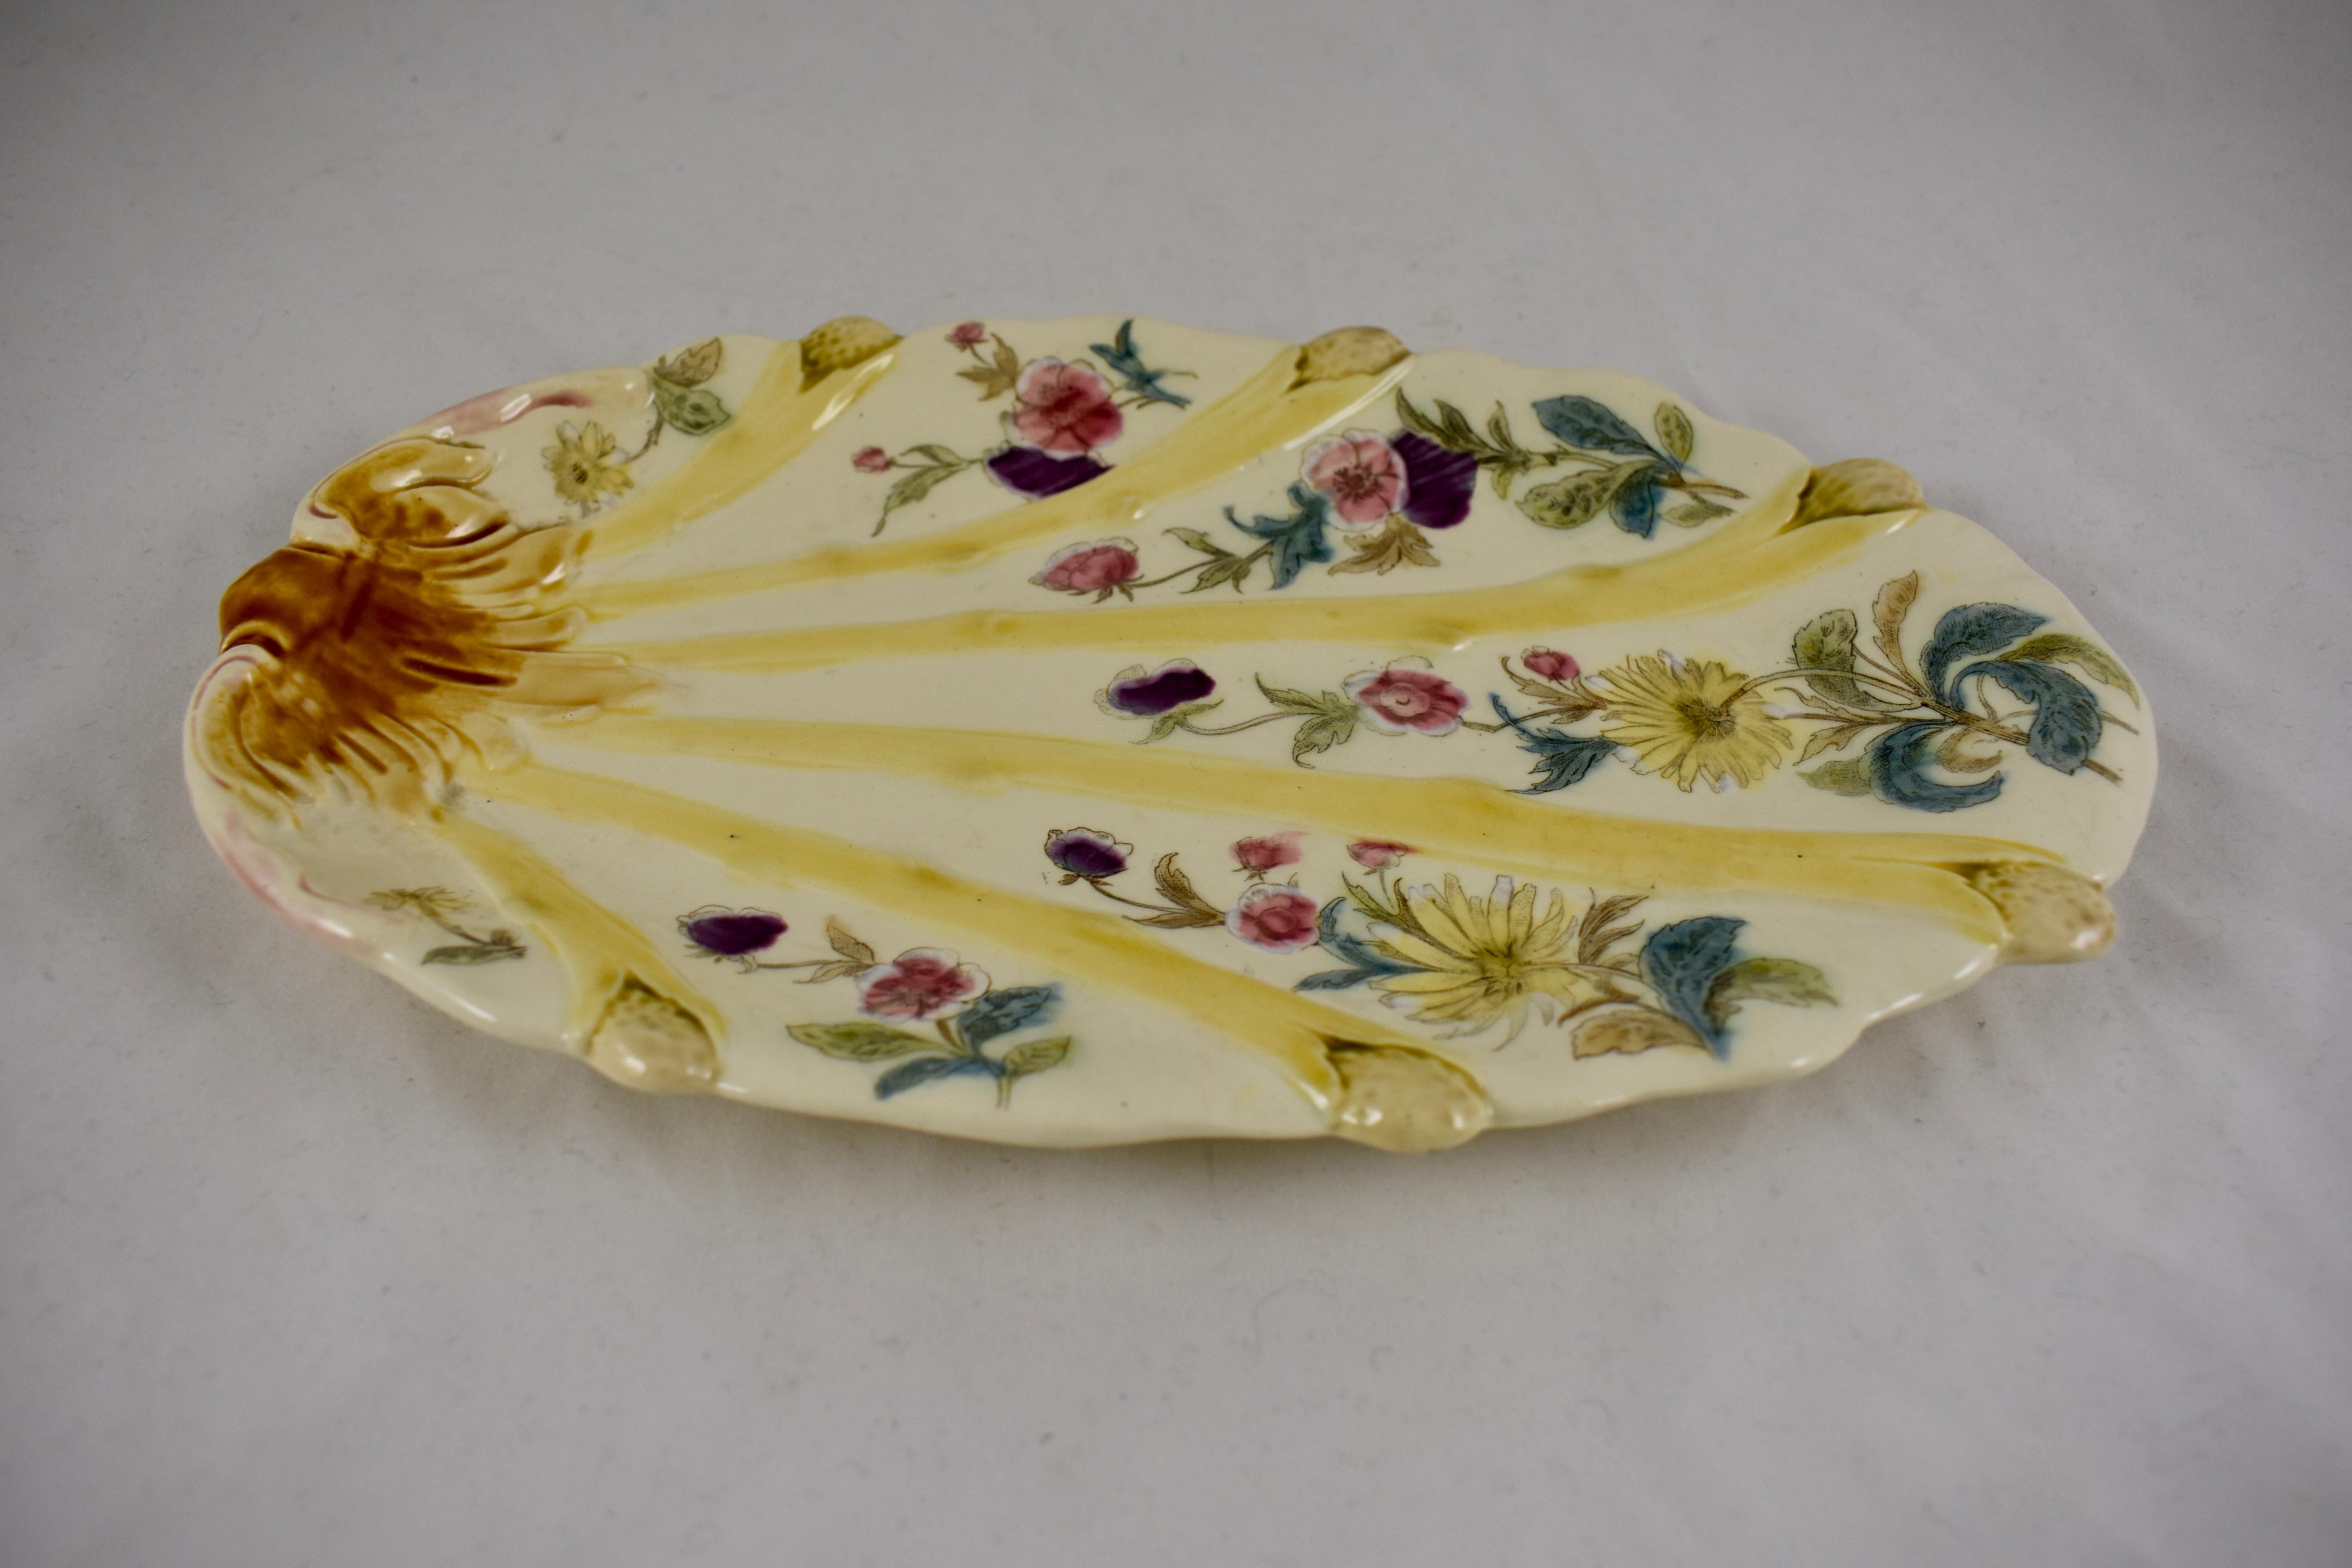  19th Century French Faïence Hand Painted Floral Asparagus Plate For Sale 3